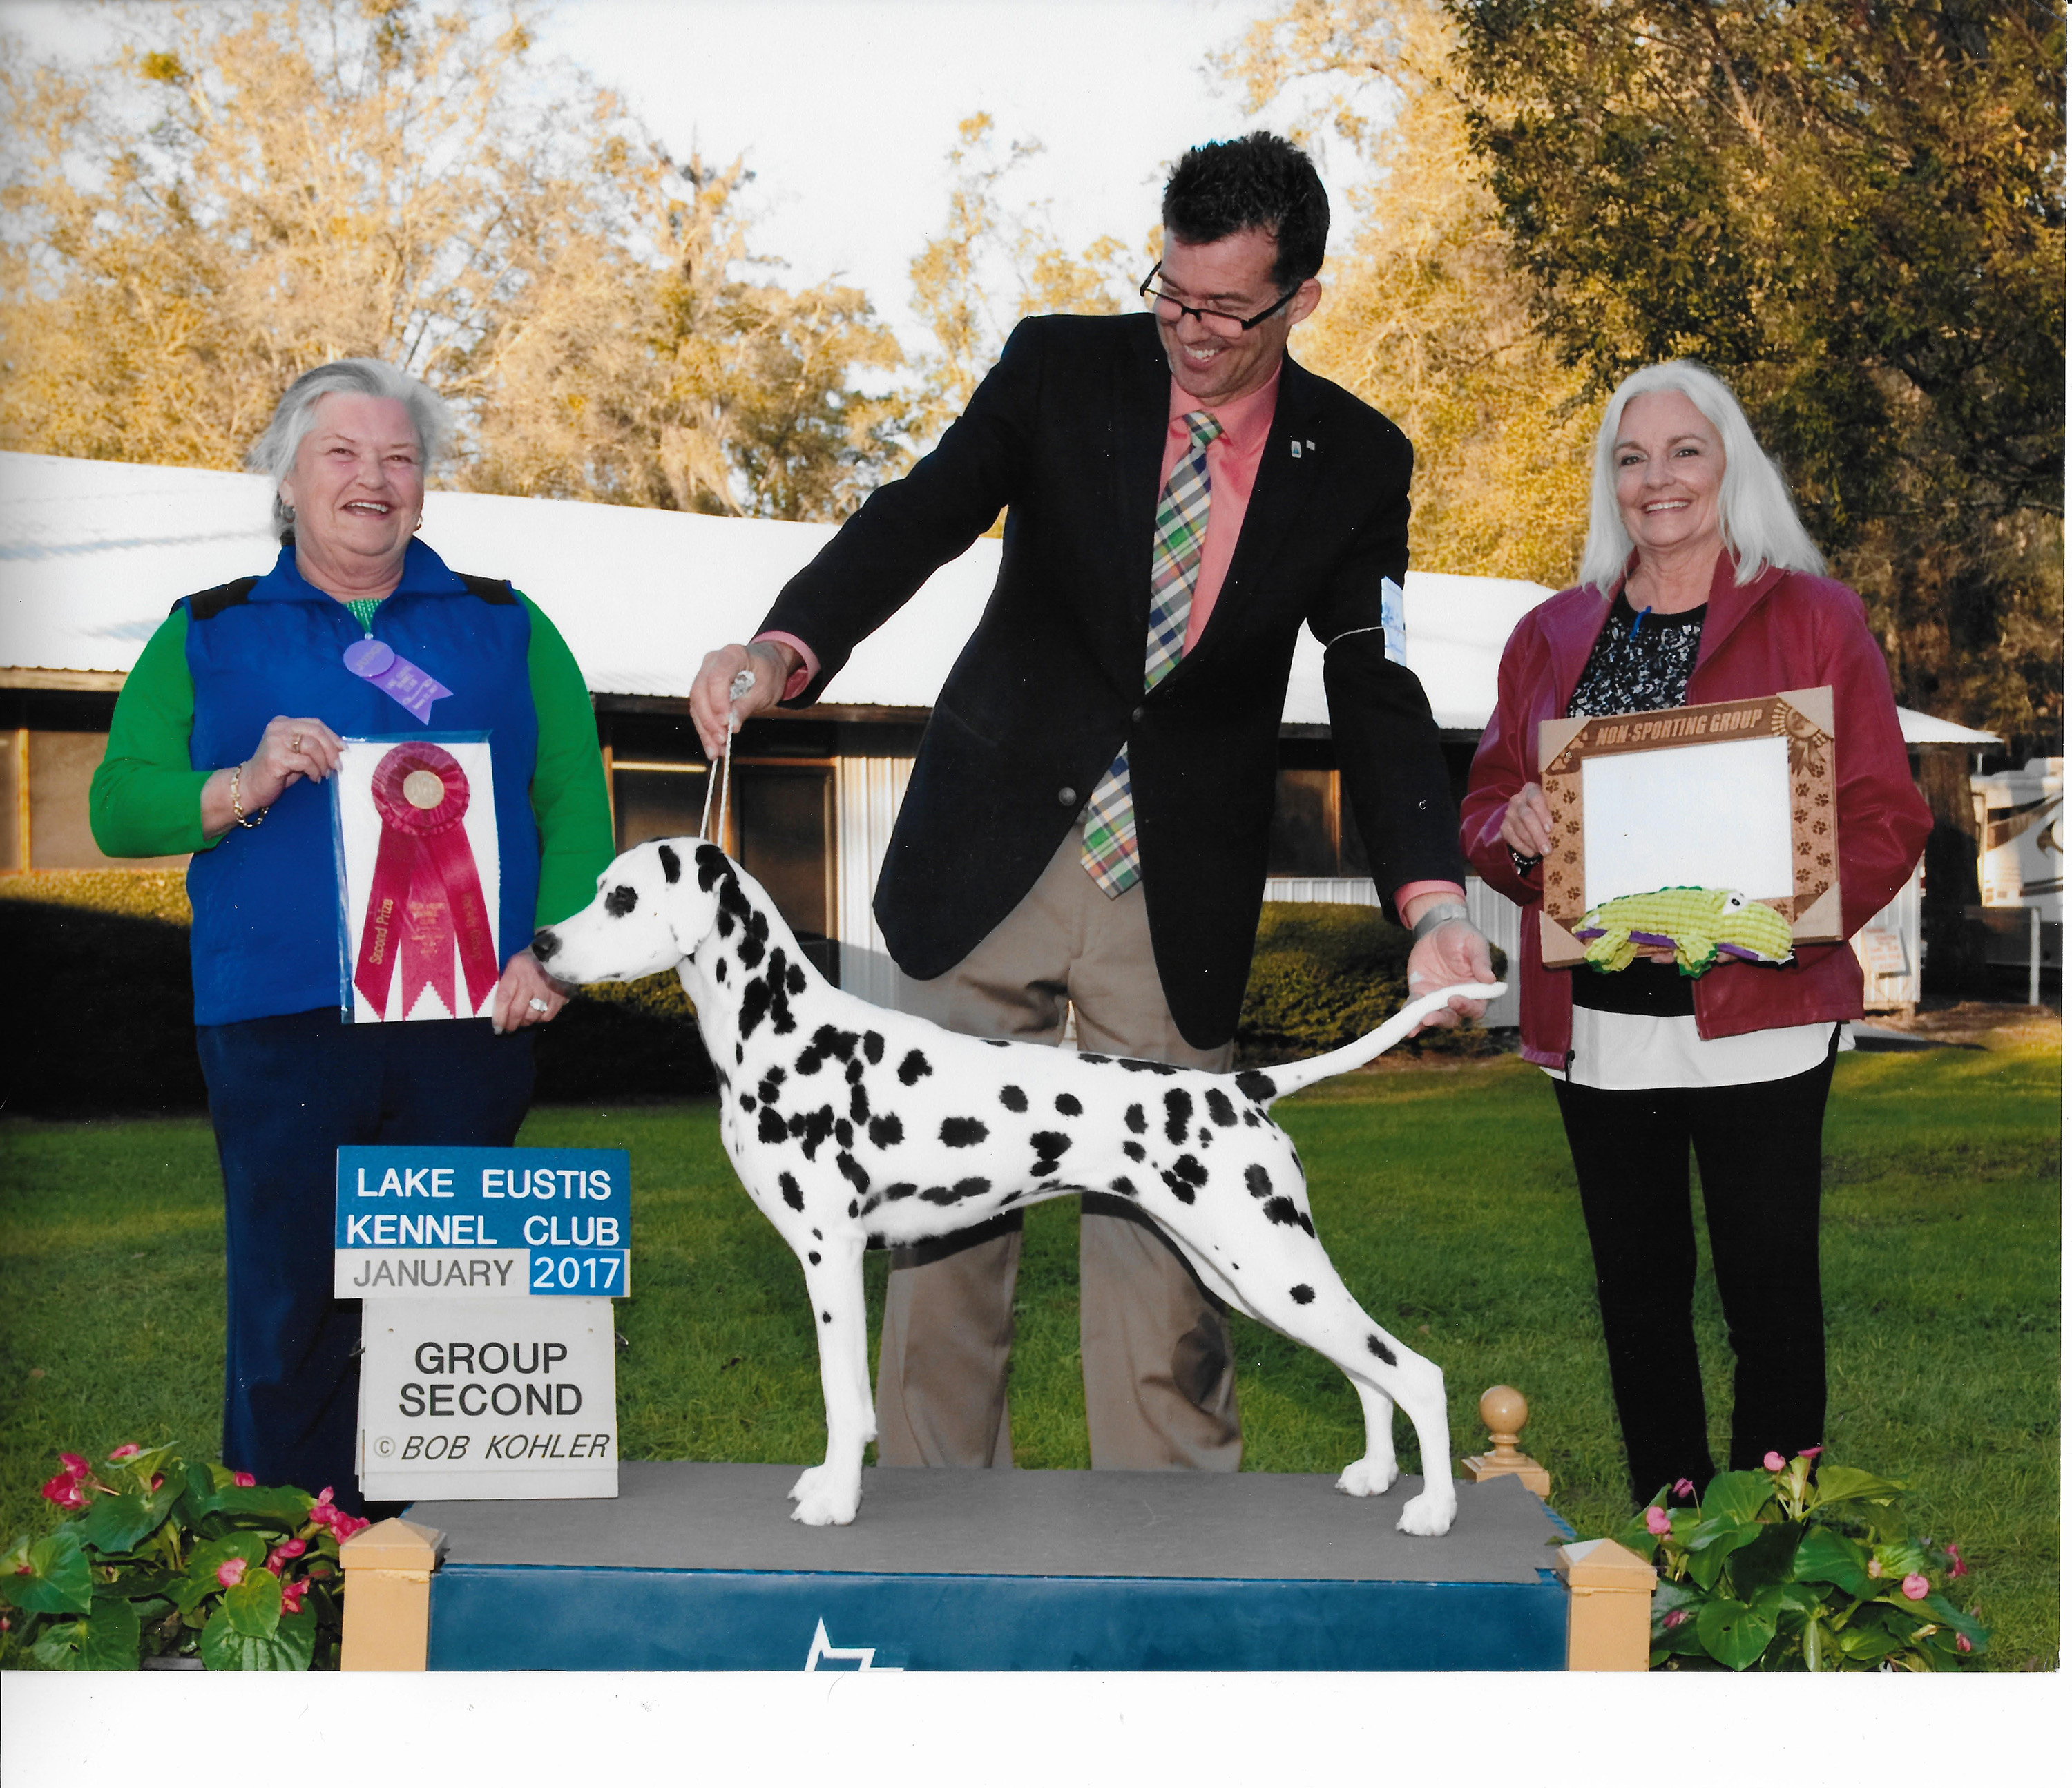 Locally owned Dalmatian wins Best of Breed at Westminster - The Blade3000 x 2589